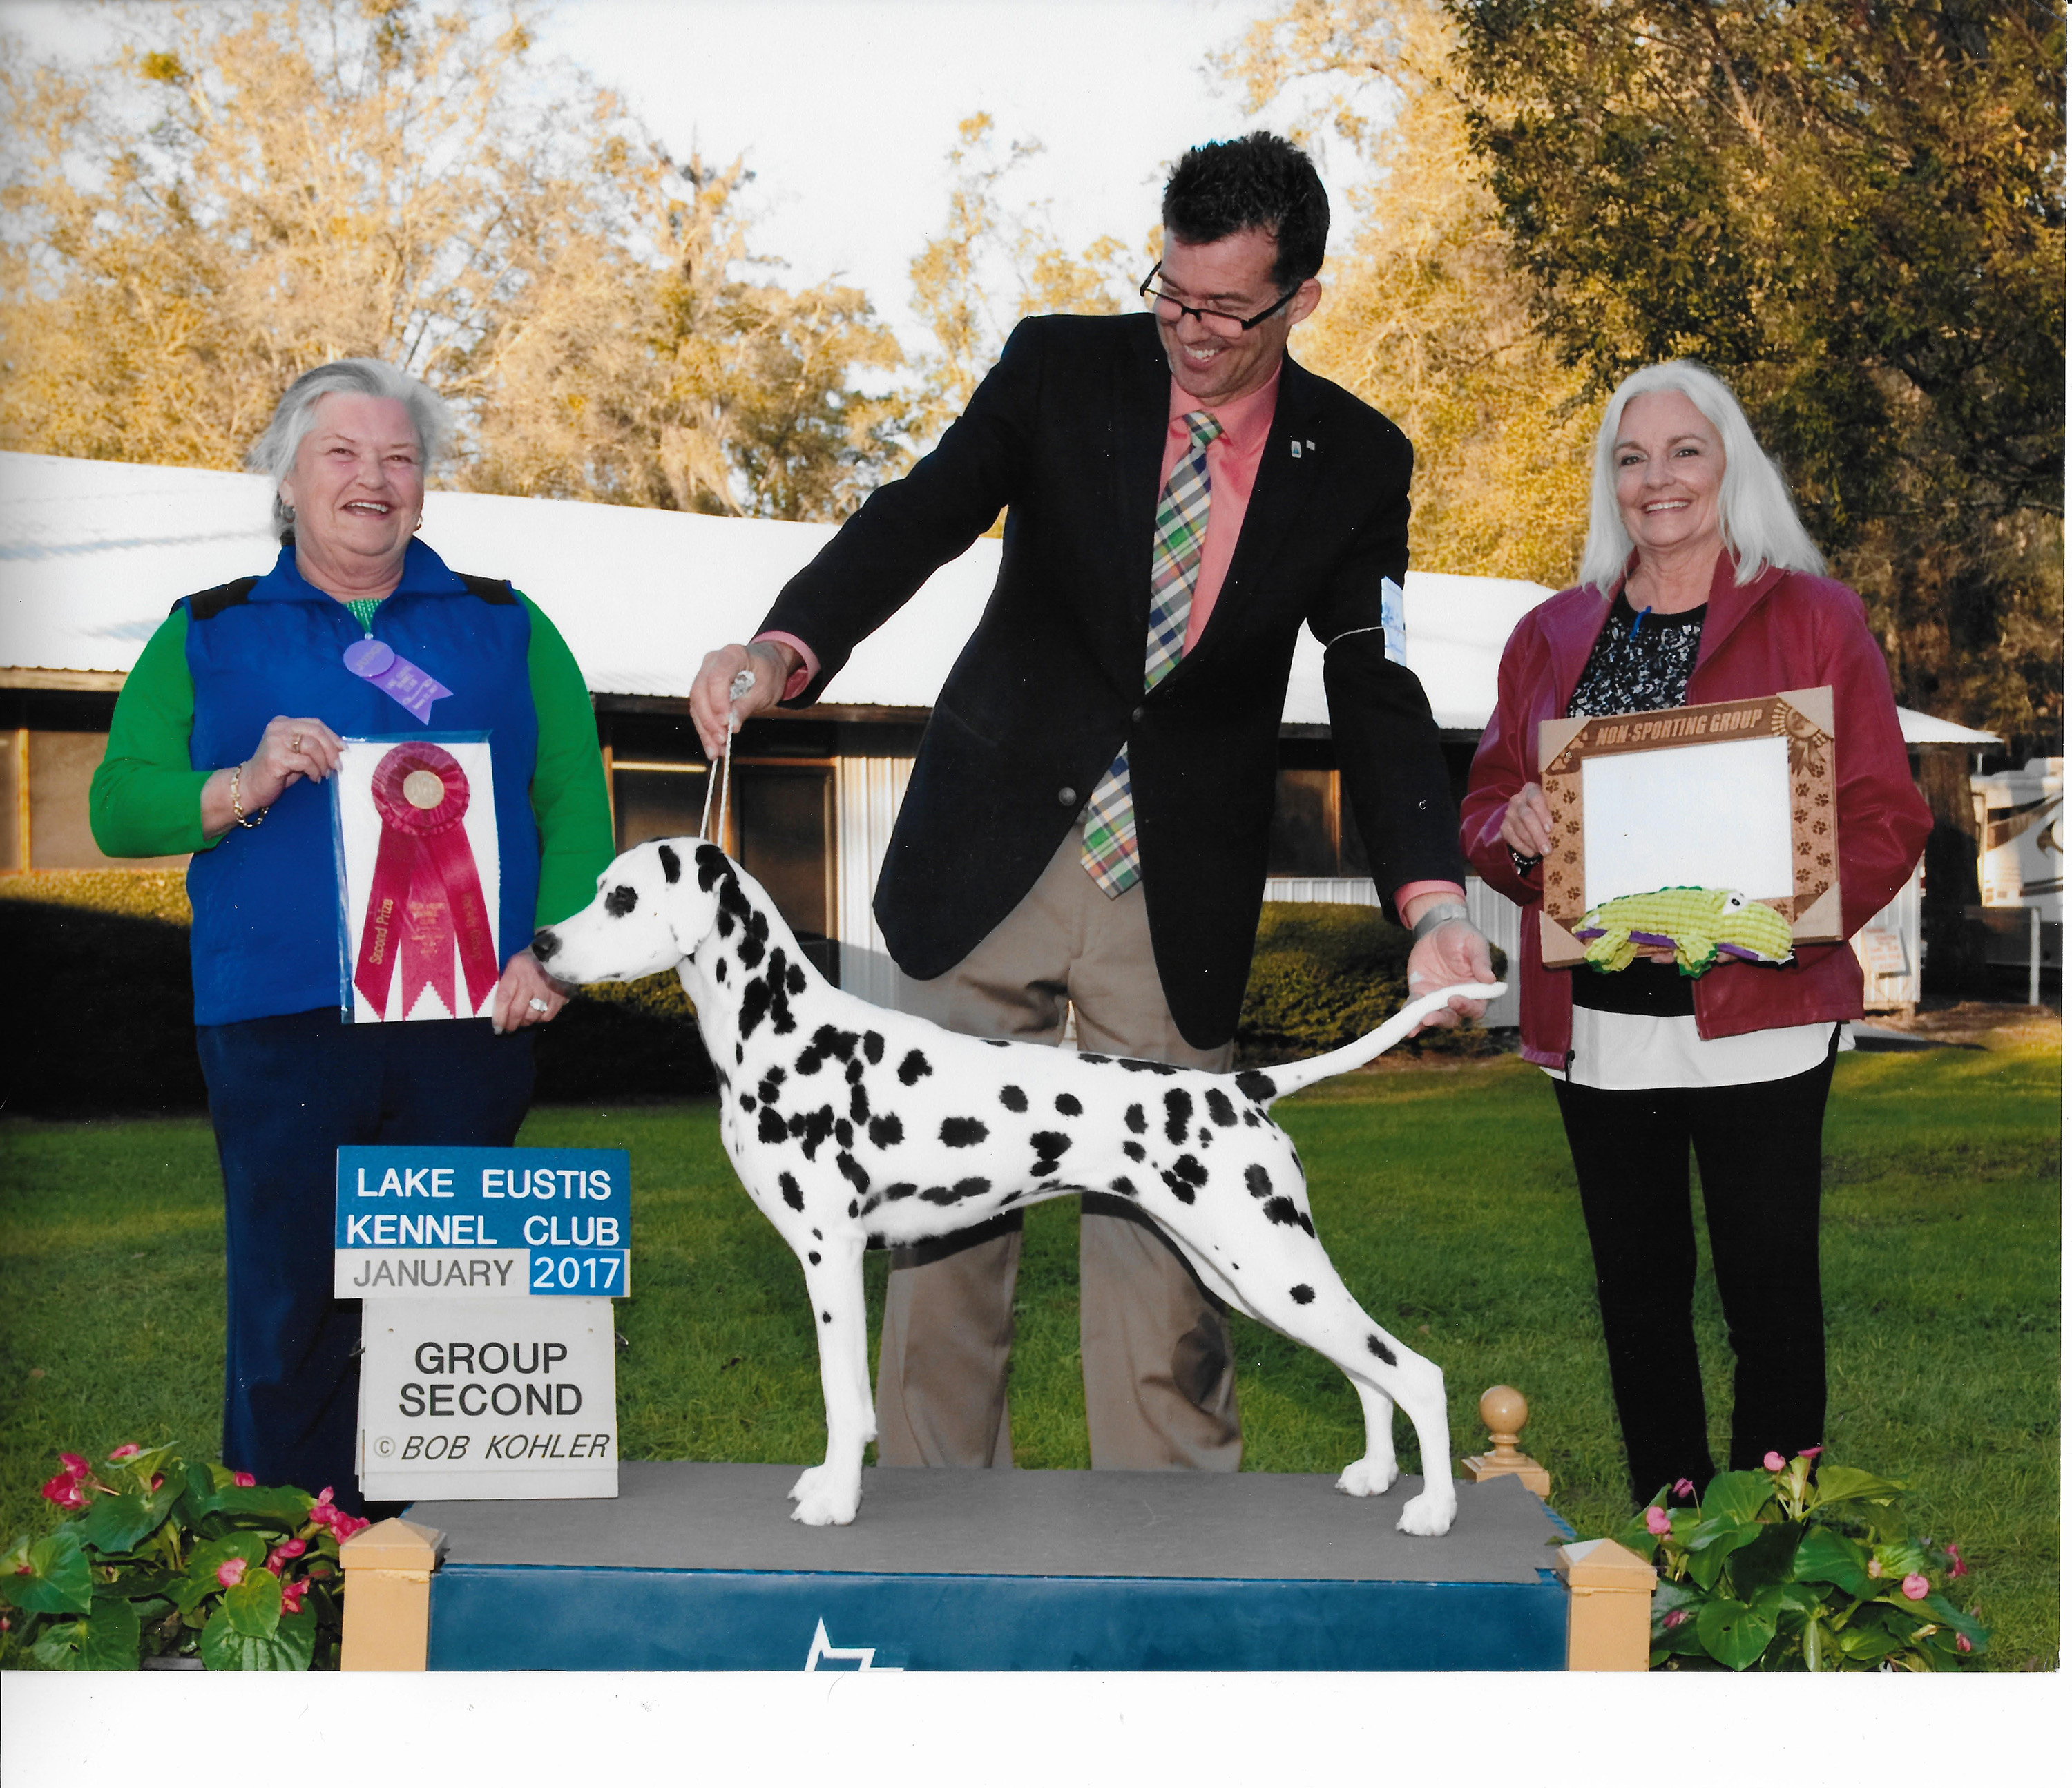 Locally owned Dalmatian wins Best of Breed at Westminster - The Blade3000 x 2589